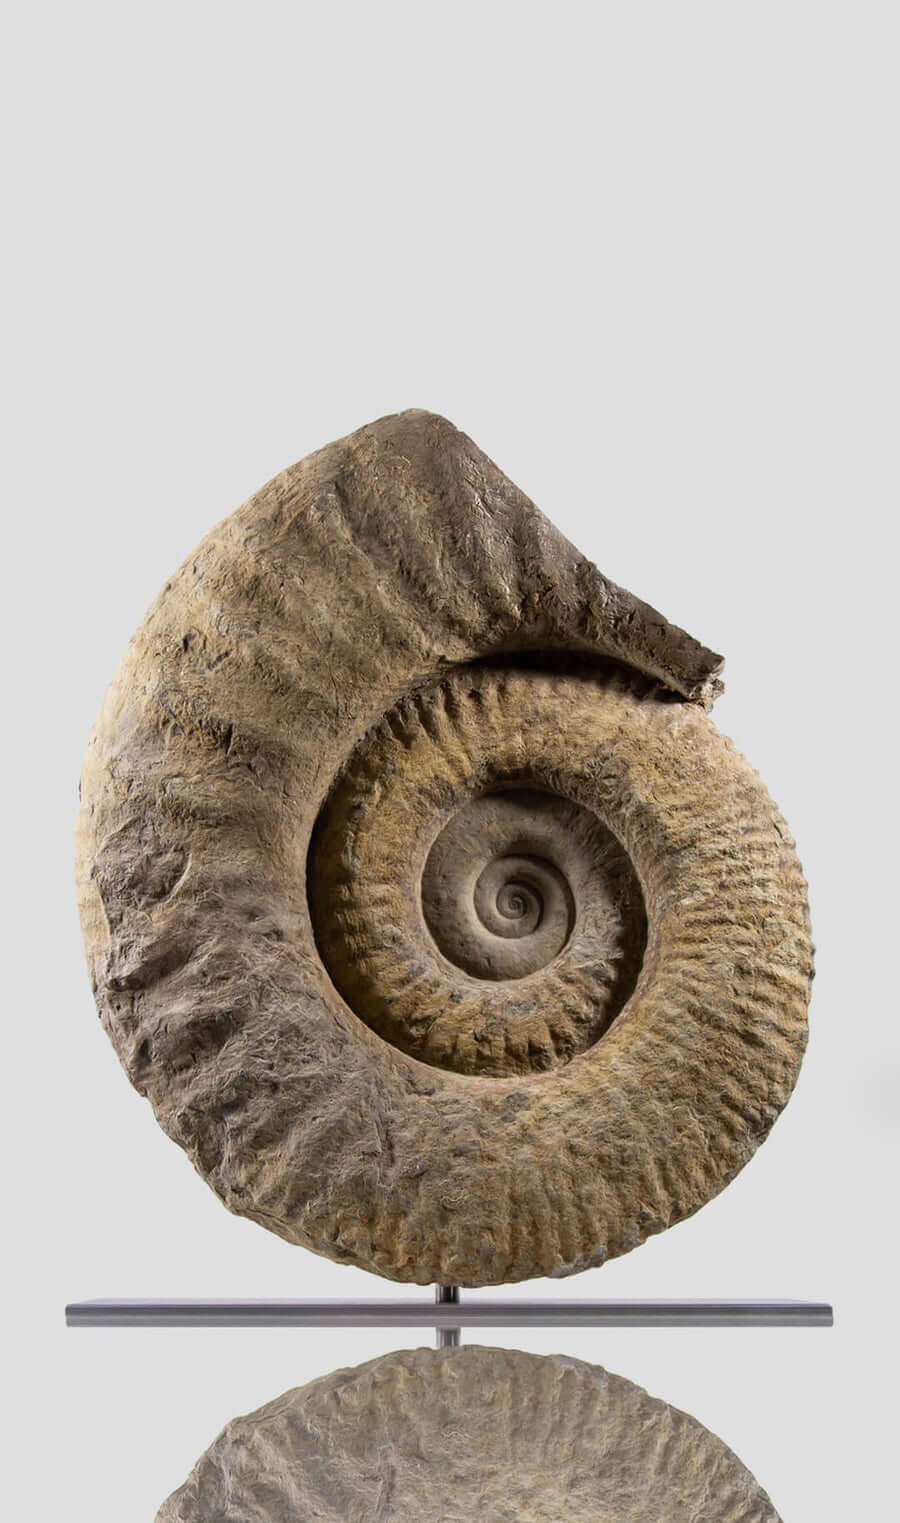 A wonderful mantelliceras ammonite for sale as an ammonite on stand for sale